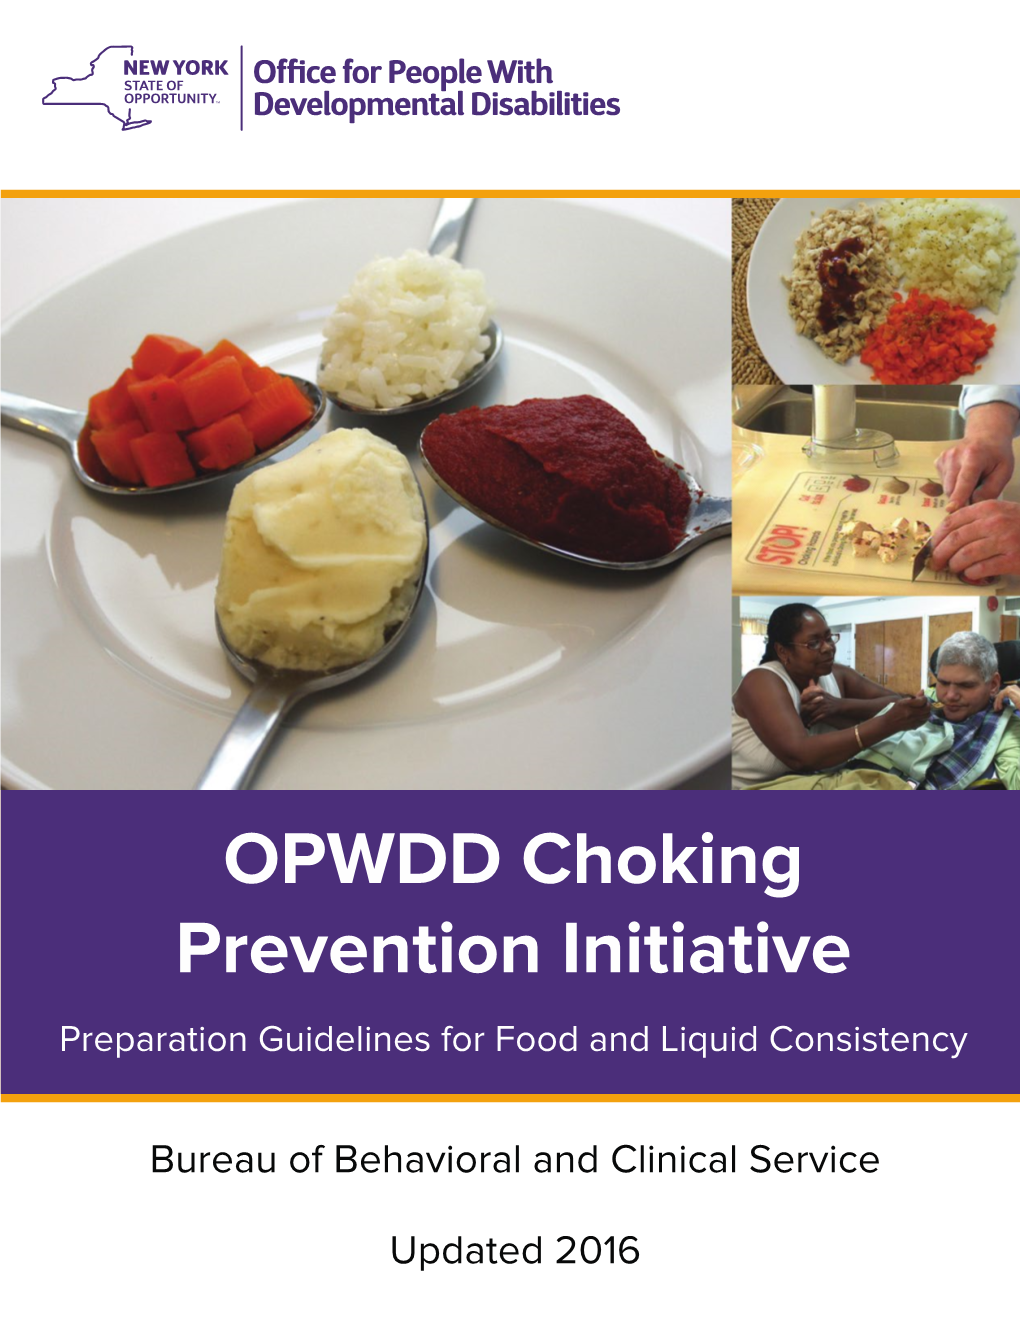 NYS OPWDD Food Consistency Guidelines 2 OPWDD Putting People First